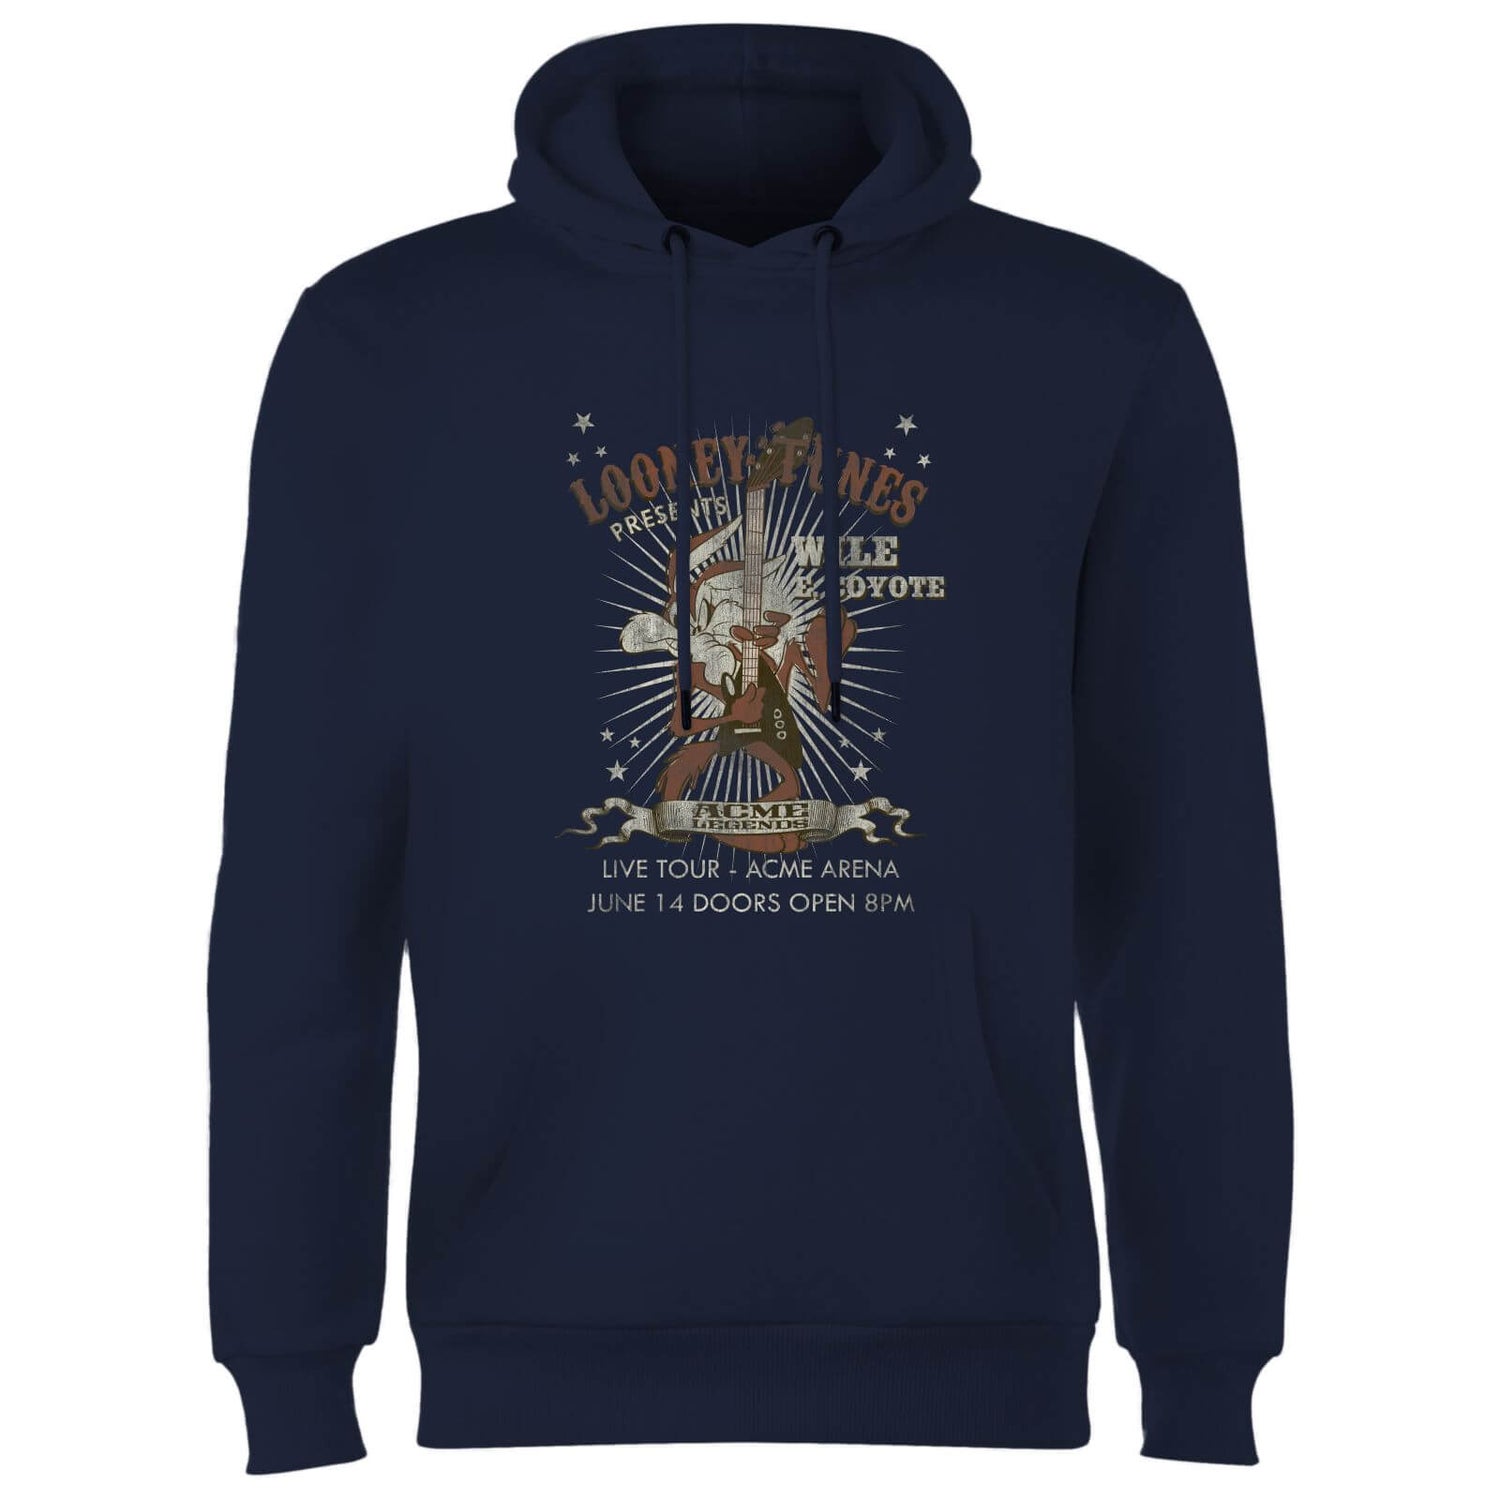 Looney Tunes Wile E Coyote Guitar Arena Tour Hoodie - Navy